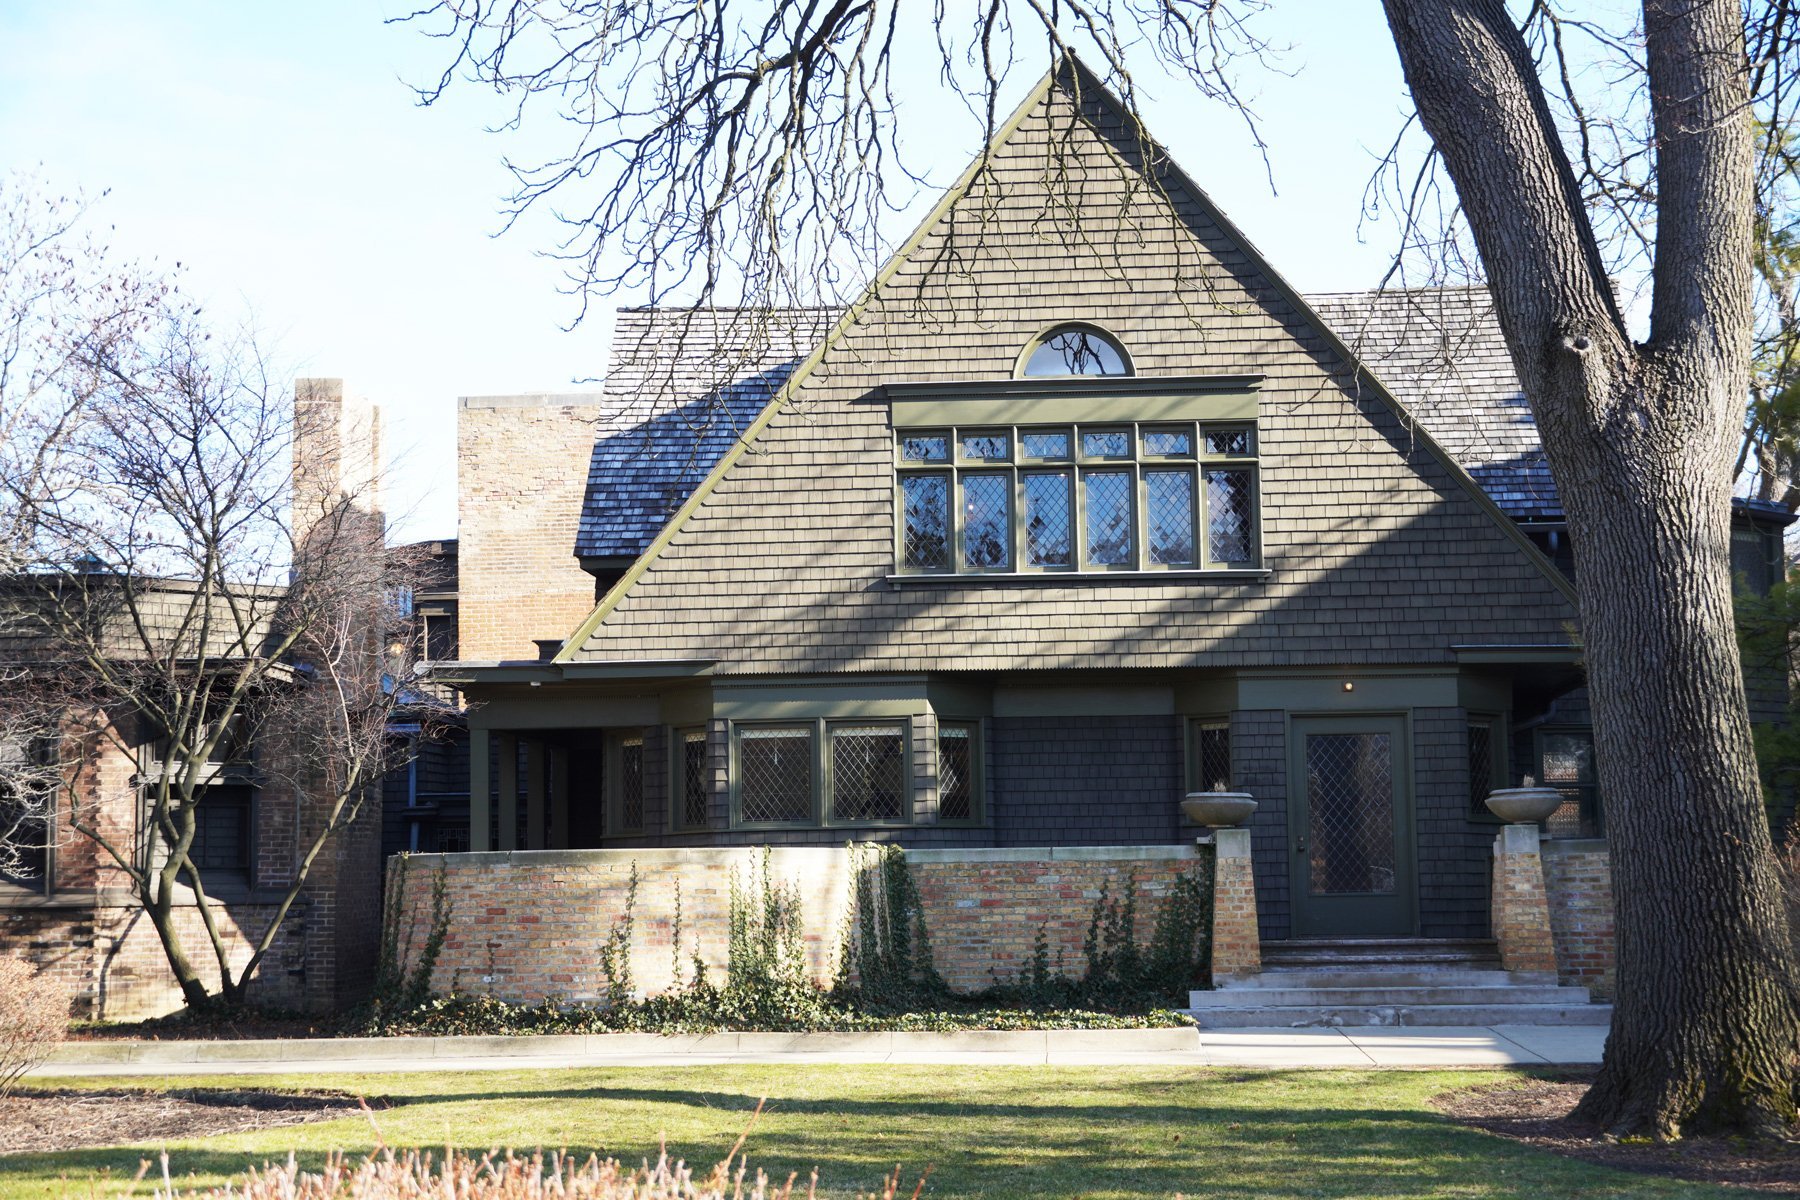 The Story of Frank Lloyd Wright's Oak Park Home and Studio